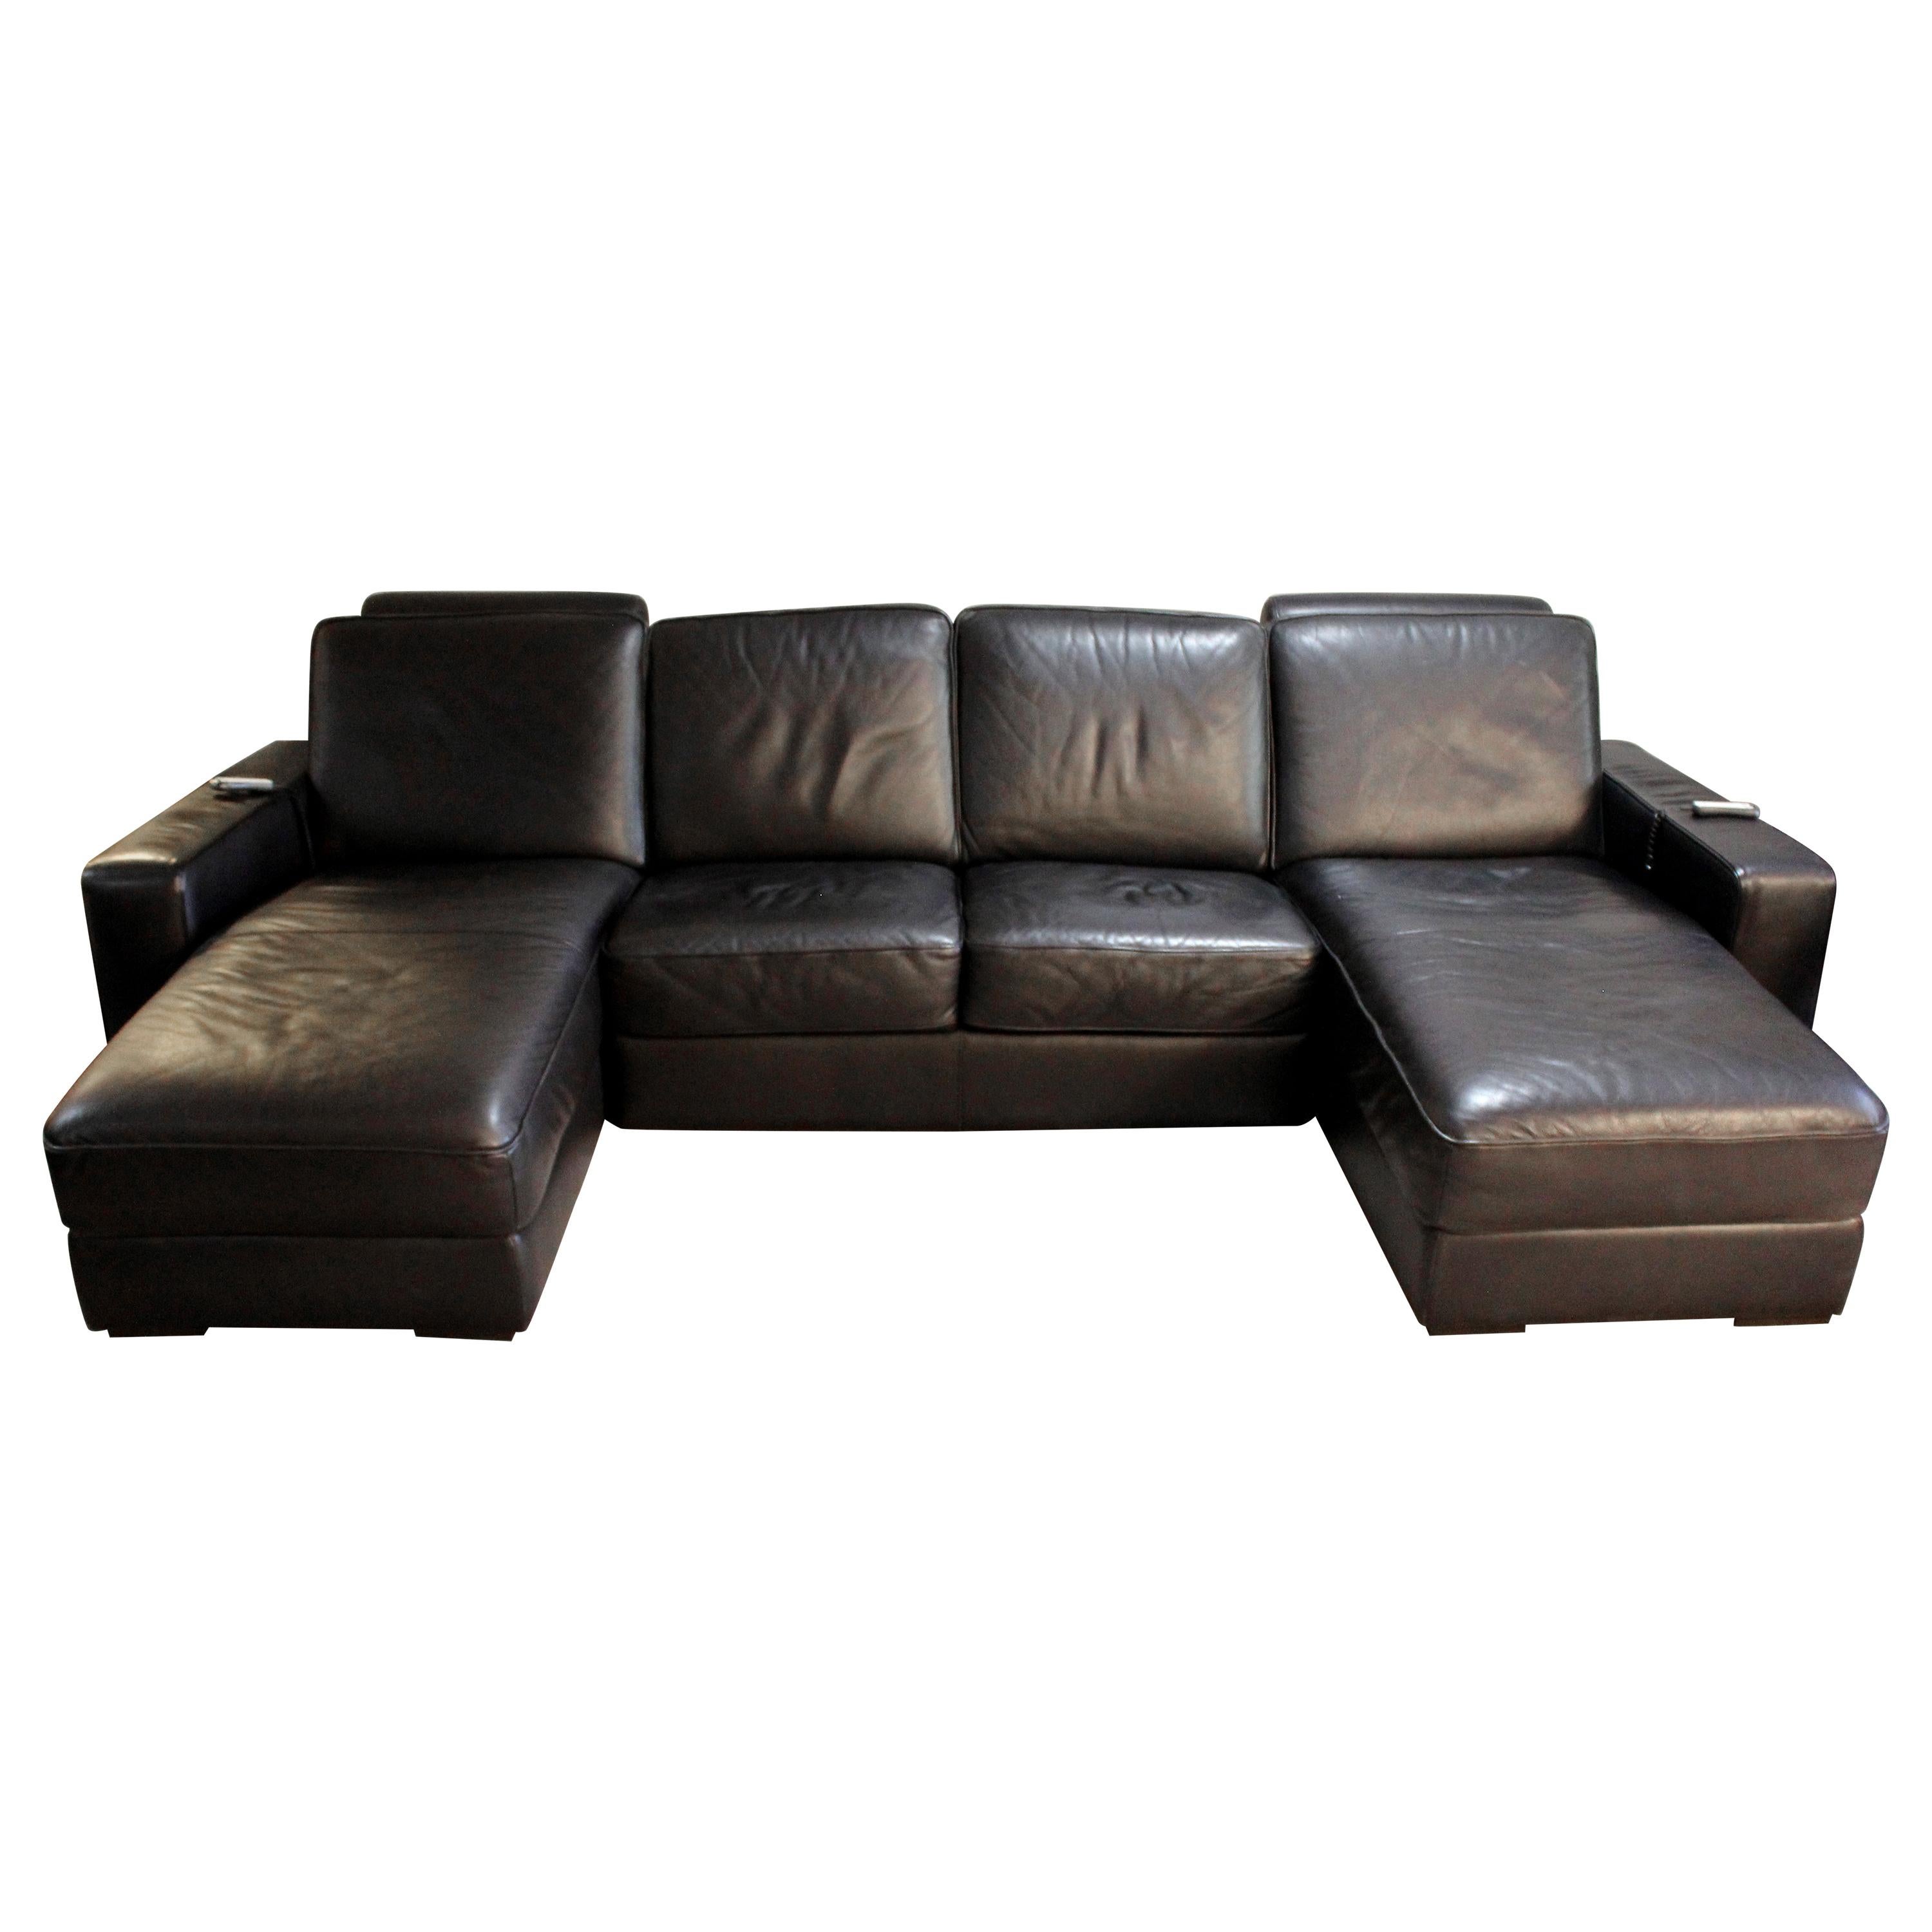 Contemporary Modern Natuzzi Black Leather 4-Seat Sectional Sofa with 2 Chaises